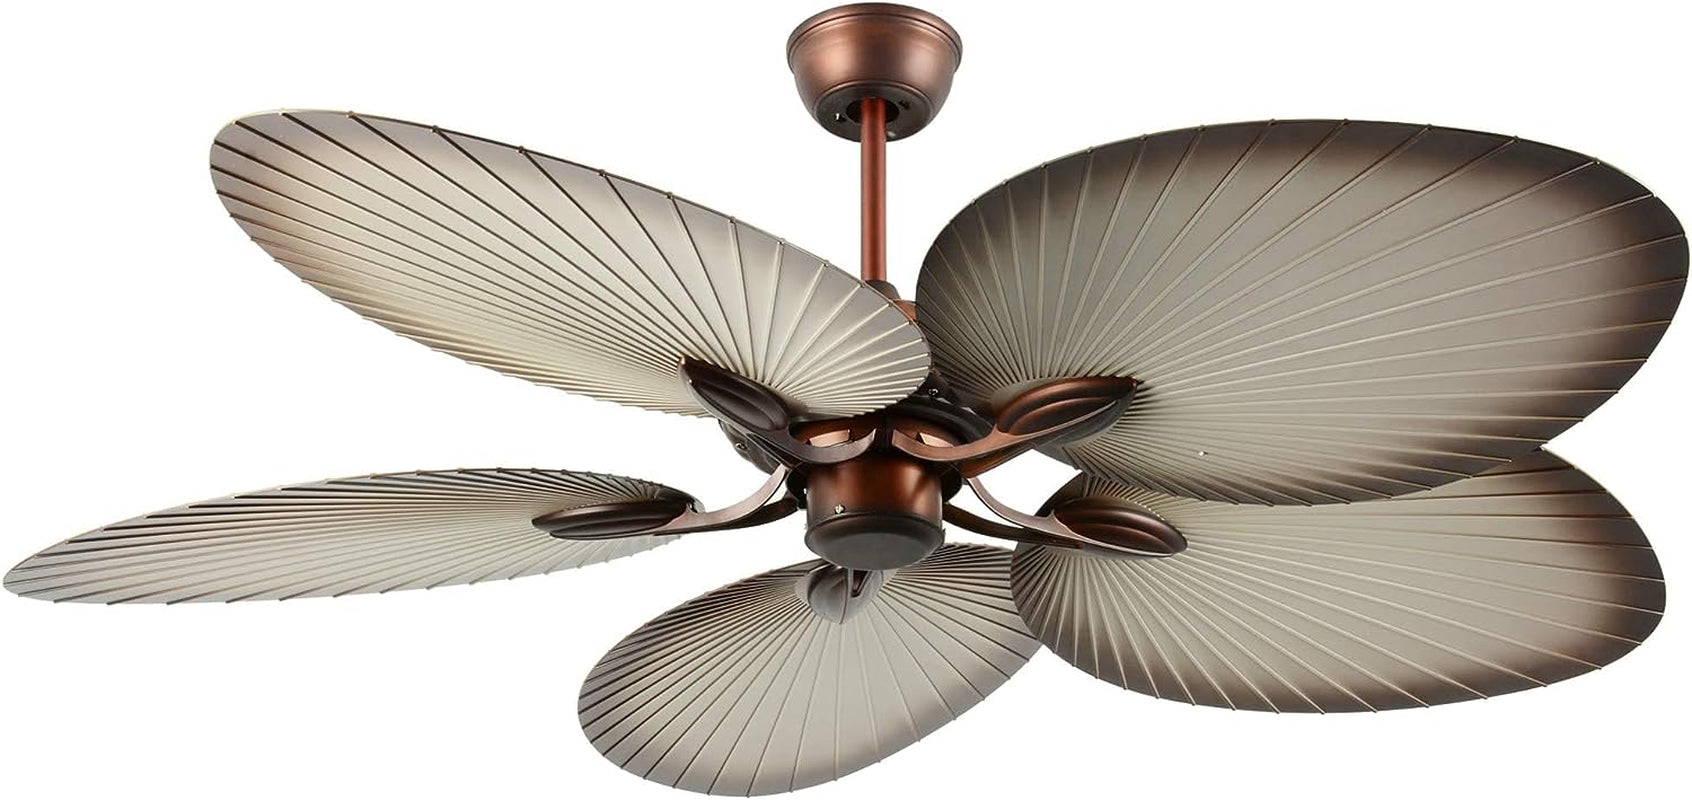 Whmetal Cover 52 Inch Tropical Ceiling Fan with Remote Control, 5 ABS Damp Rated Palm Blades for Indoor, Outdoor(Brown)